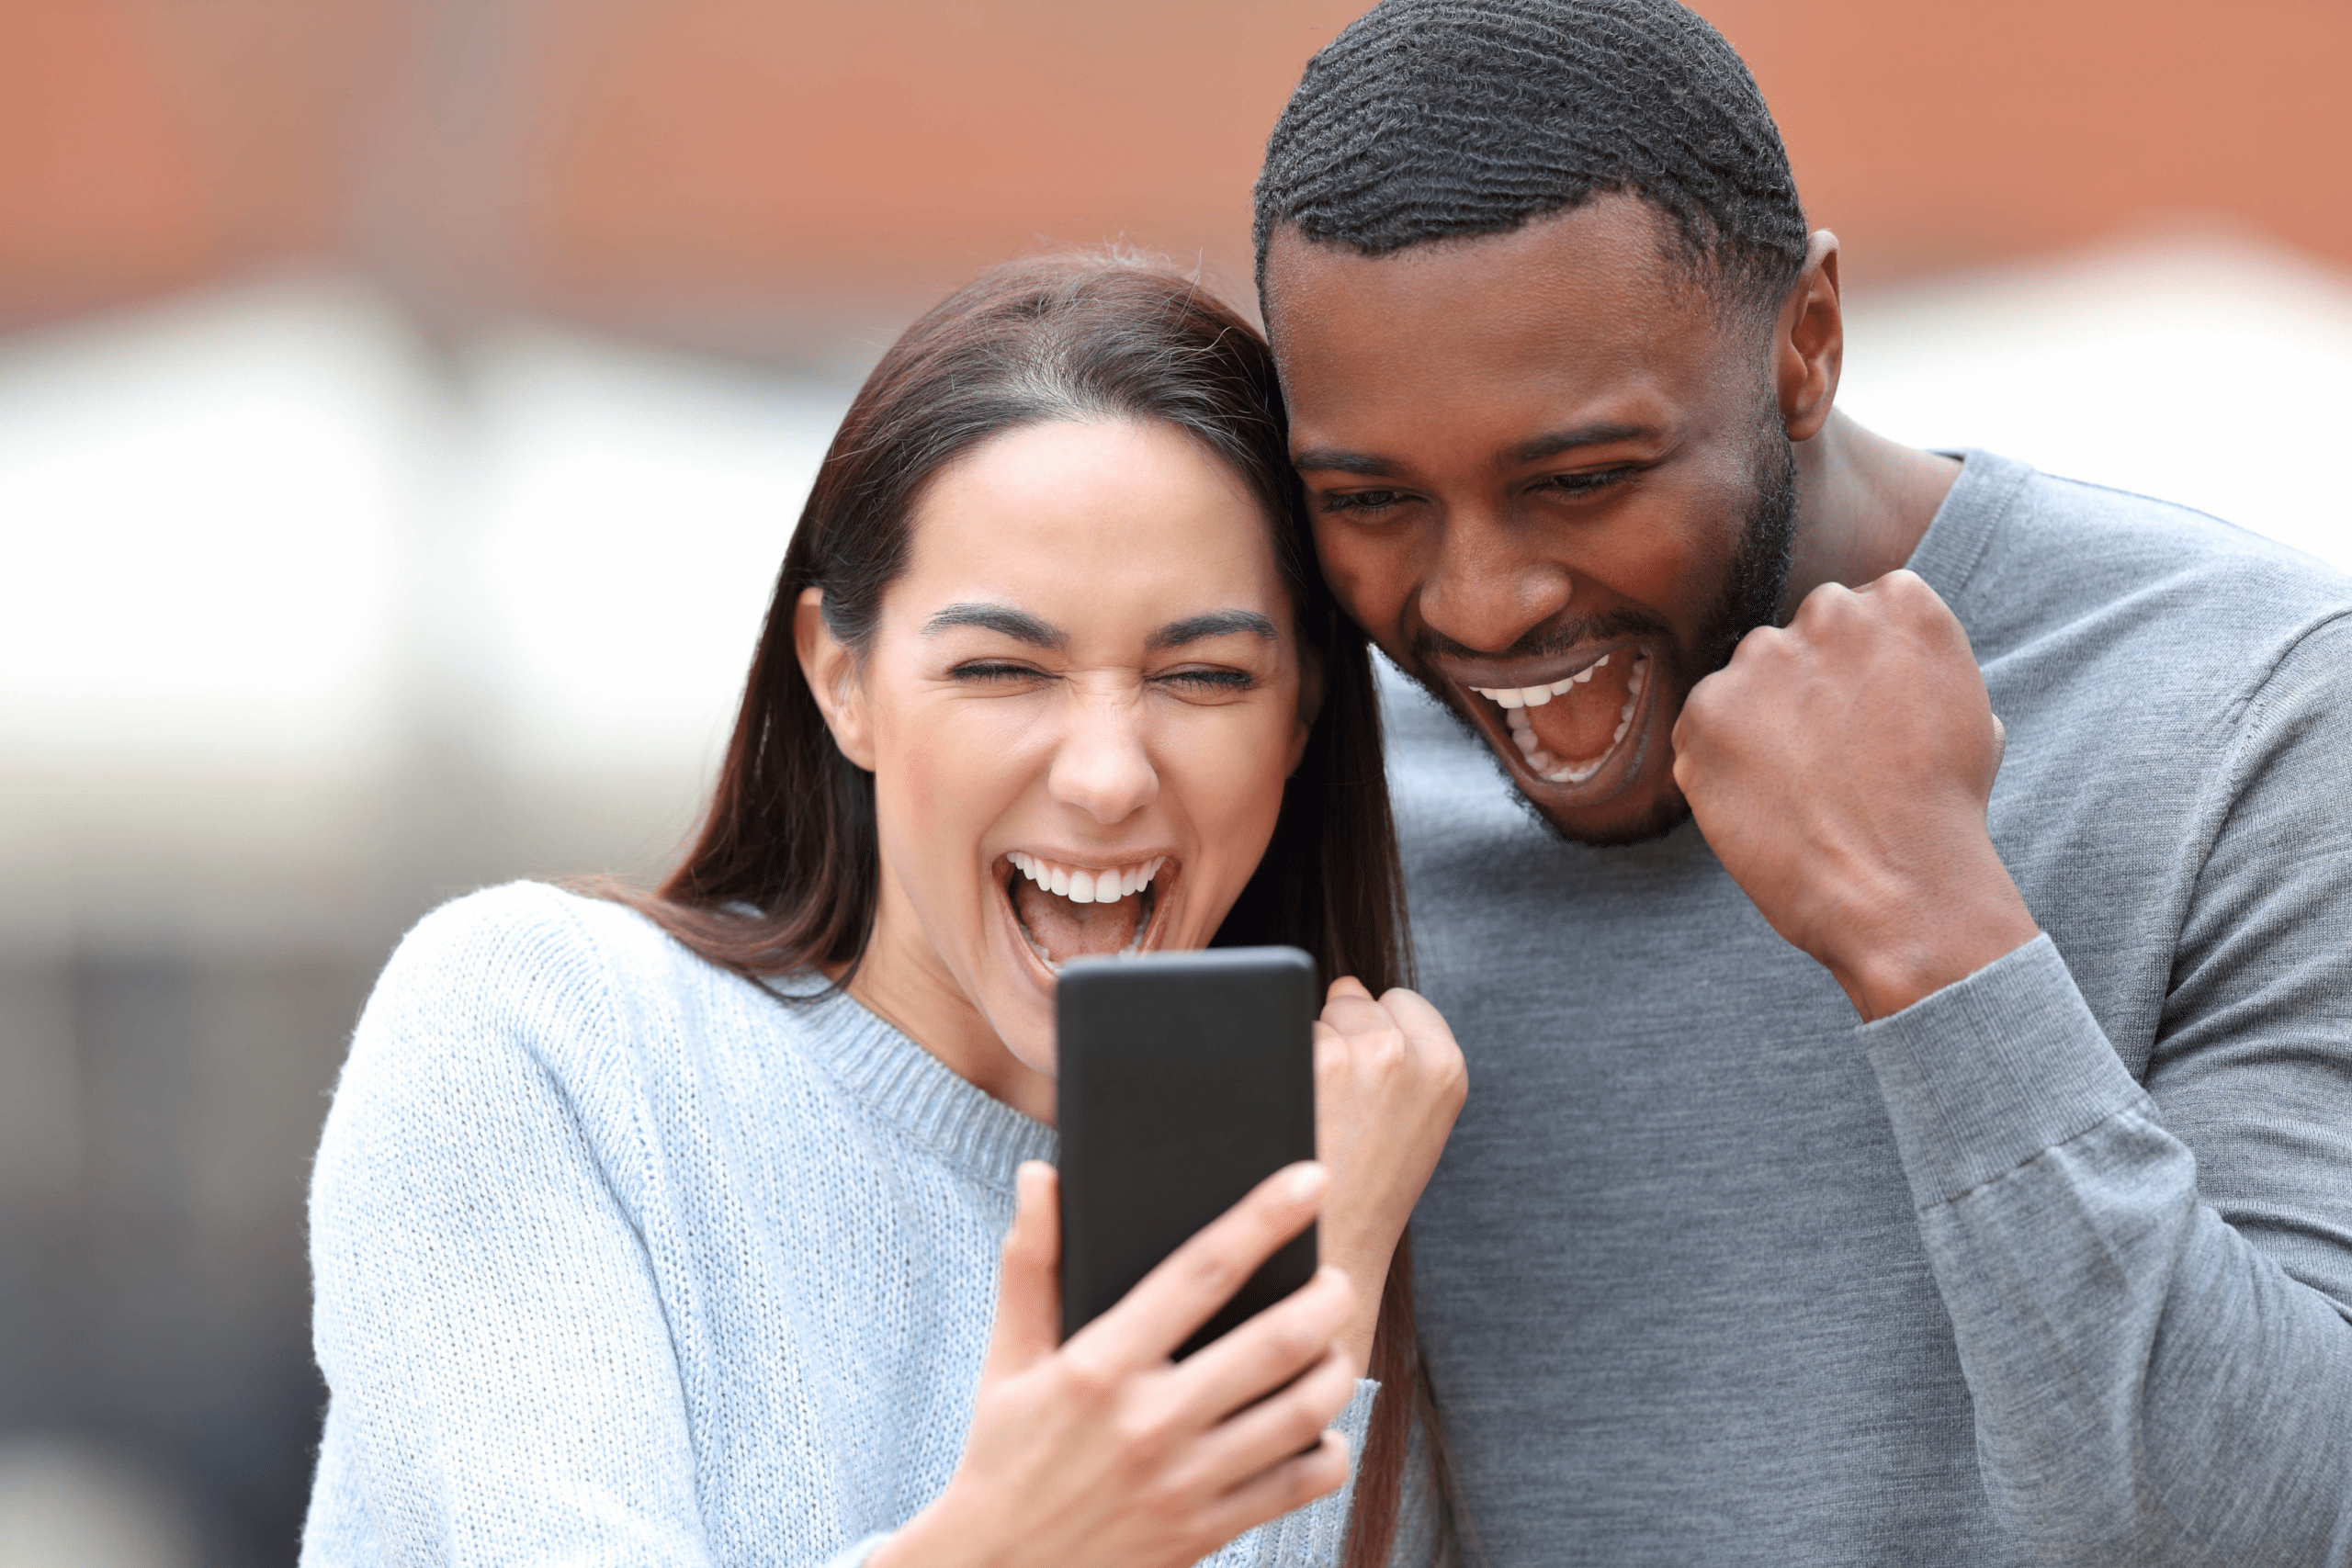 two people smiling and looking at a phone screen together